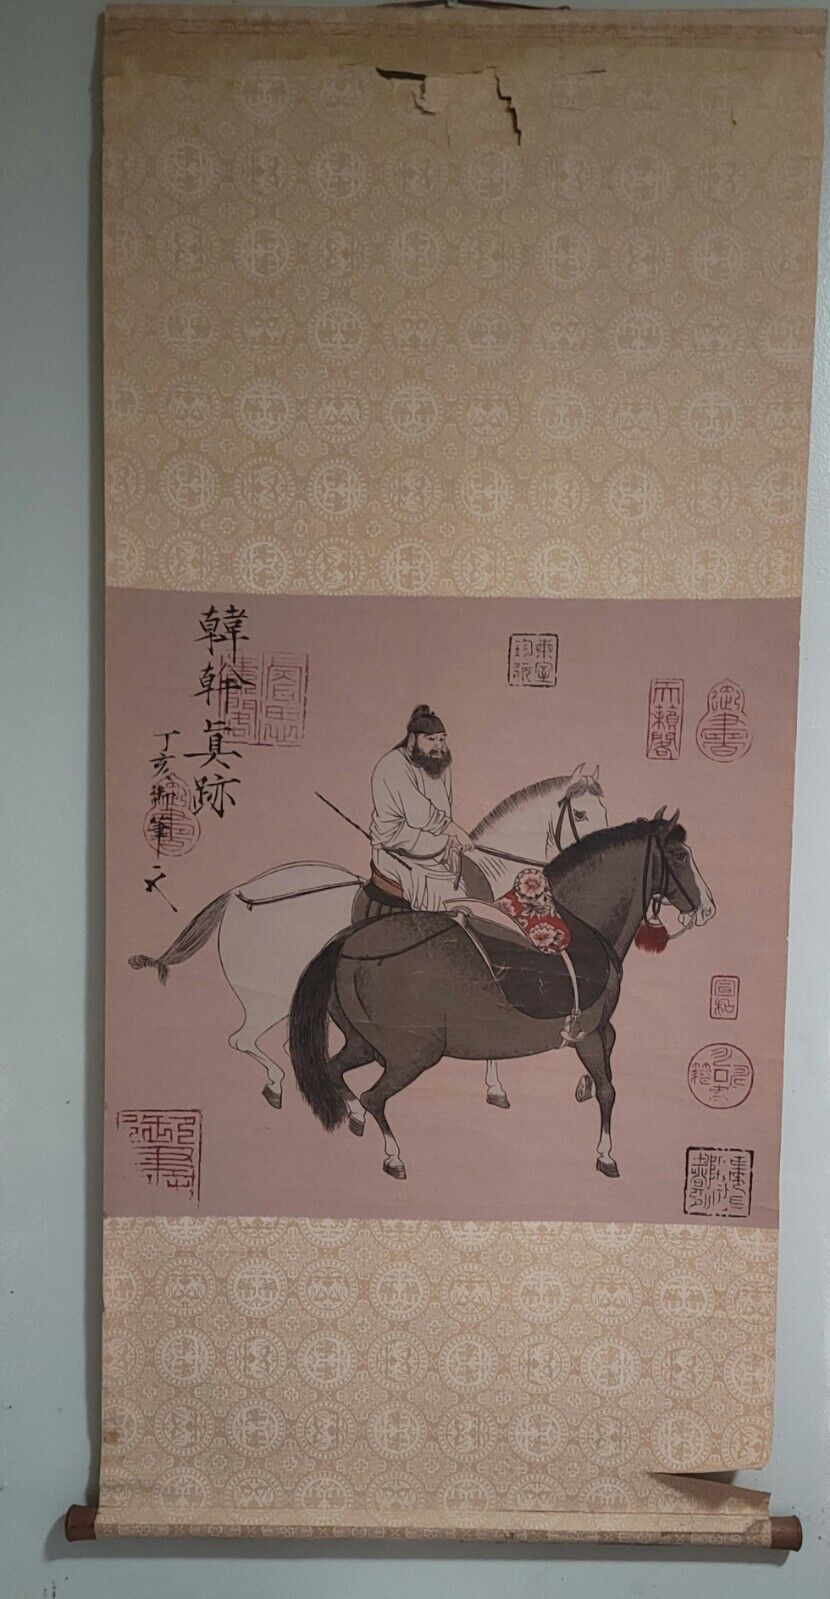 Vintage Two Horses and a Groom/Man Herding Horses Scroll by Han Kan